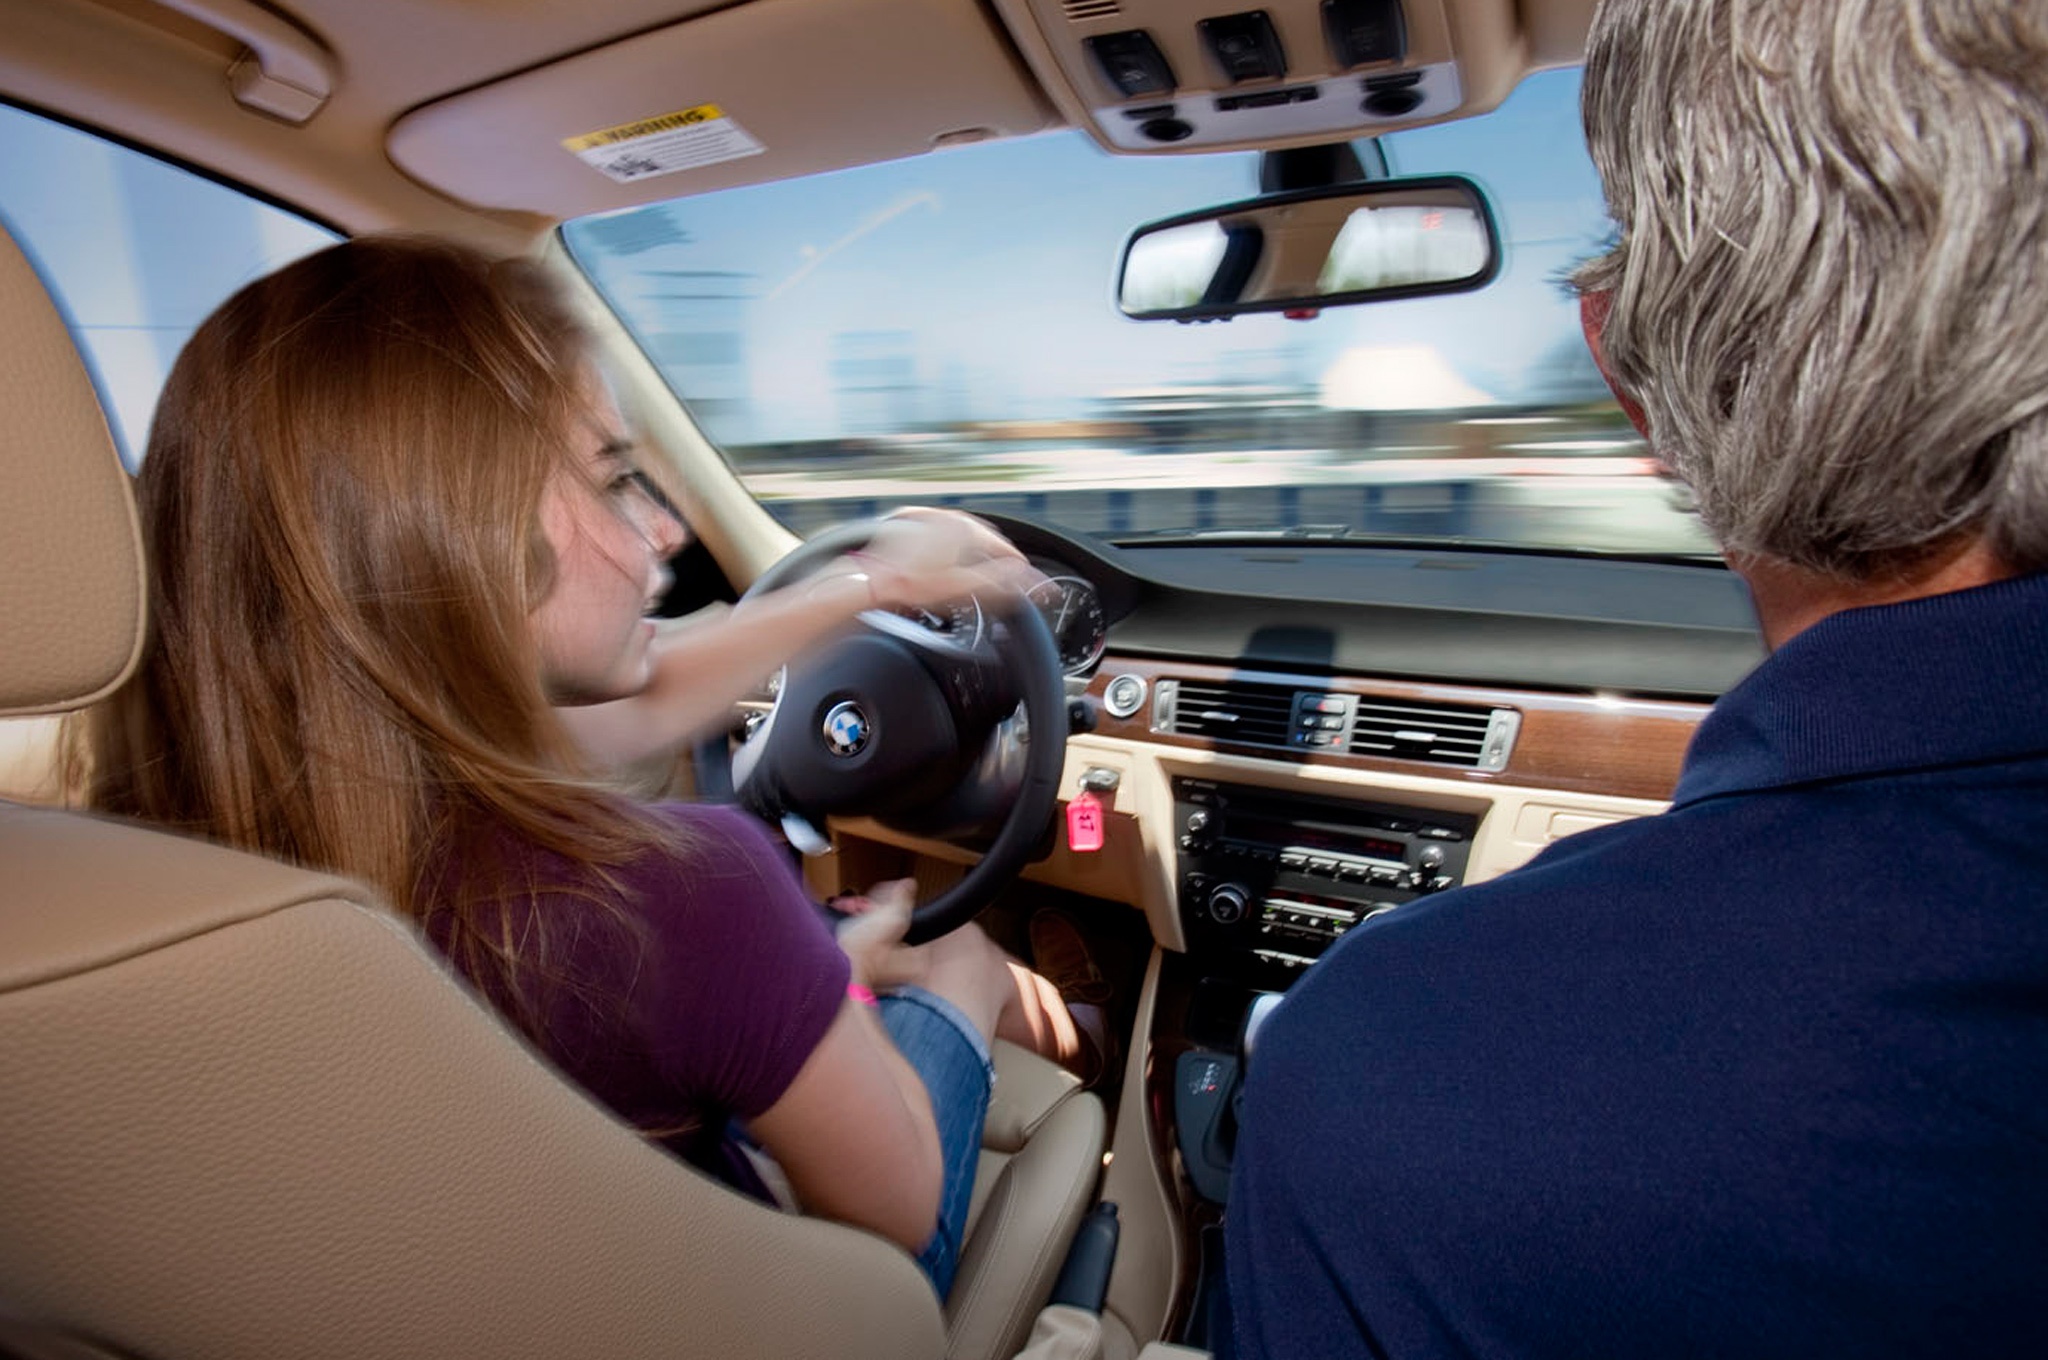 Criteria to consider when selecting a driving school for your teen